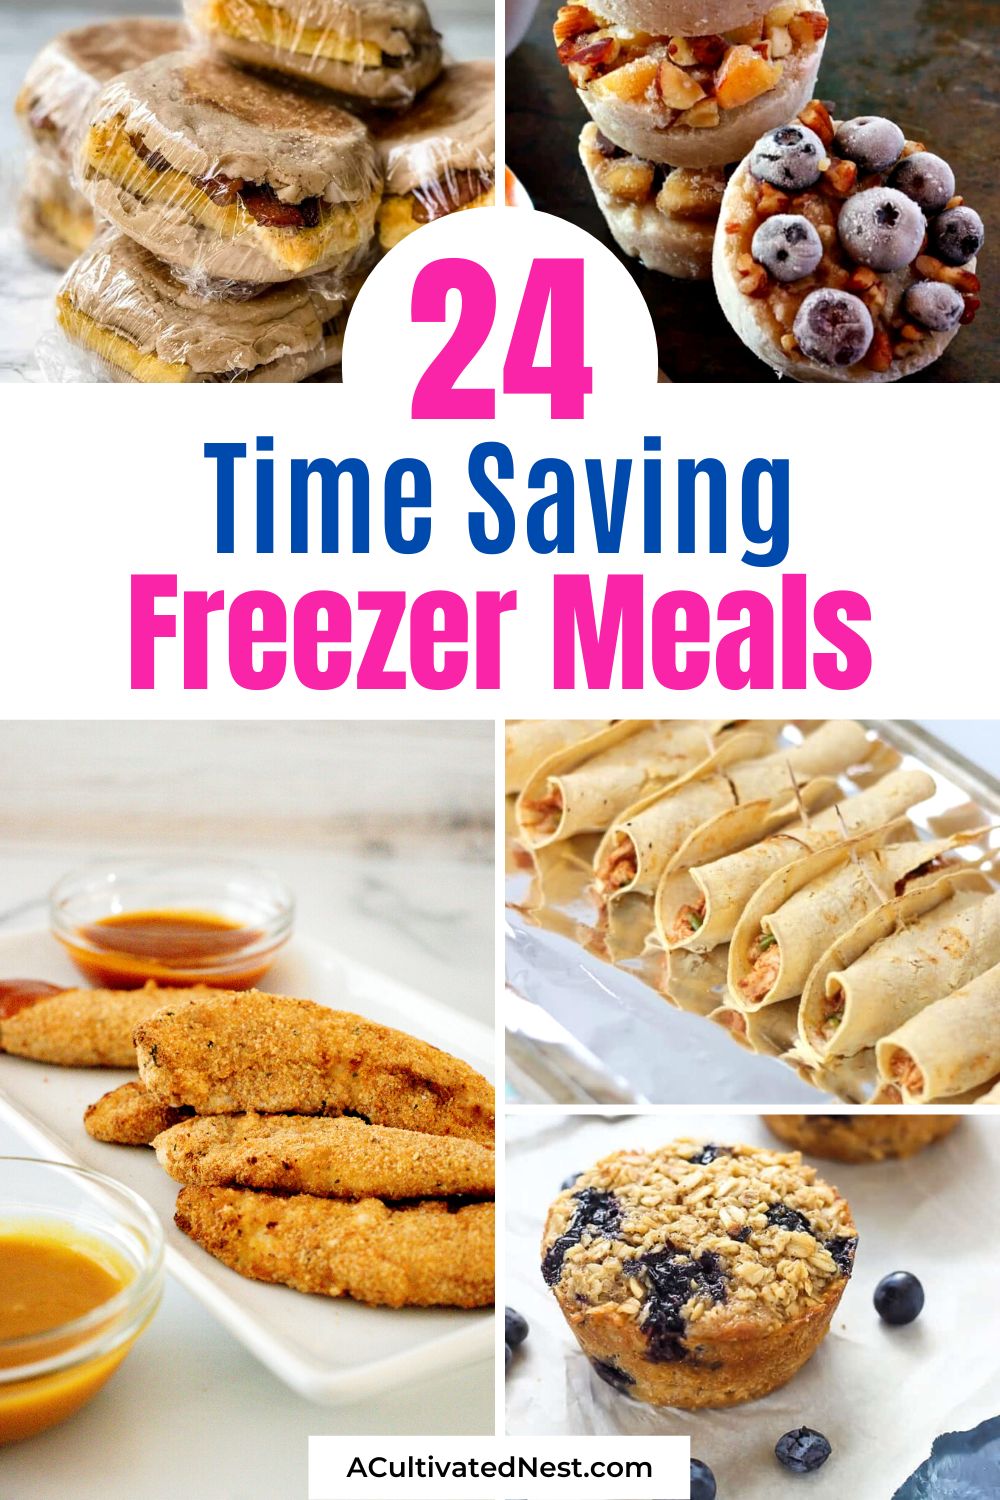 24 Time Saving and Delicious Freezer Meal Recipes- If you want delicious breakfast, lunches, and dinners without having to spend ages in the kitchen, then you need to check out these freezer meal recipes! | breakfast freezer meals, lunch freezer meals, dinner freezer meals, #freezerMeals #recipes #breakfastRecipes #dinnerRecipes #ACultivatedNest